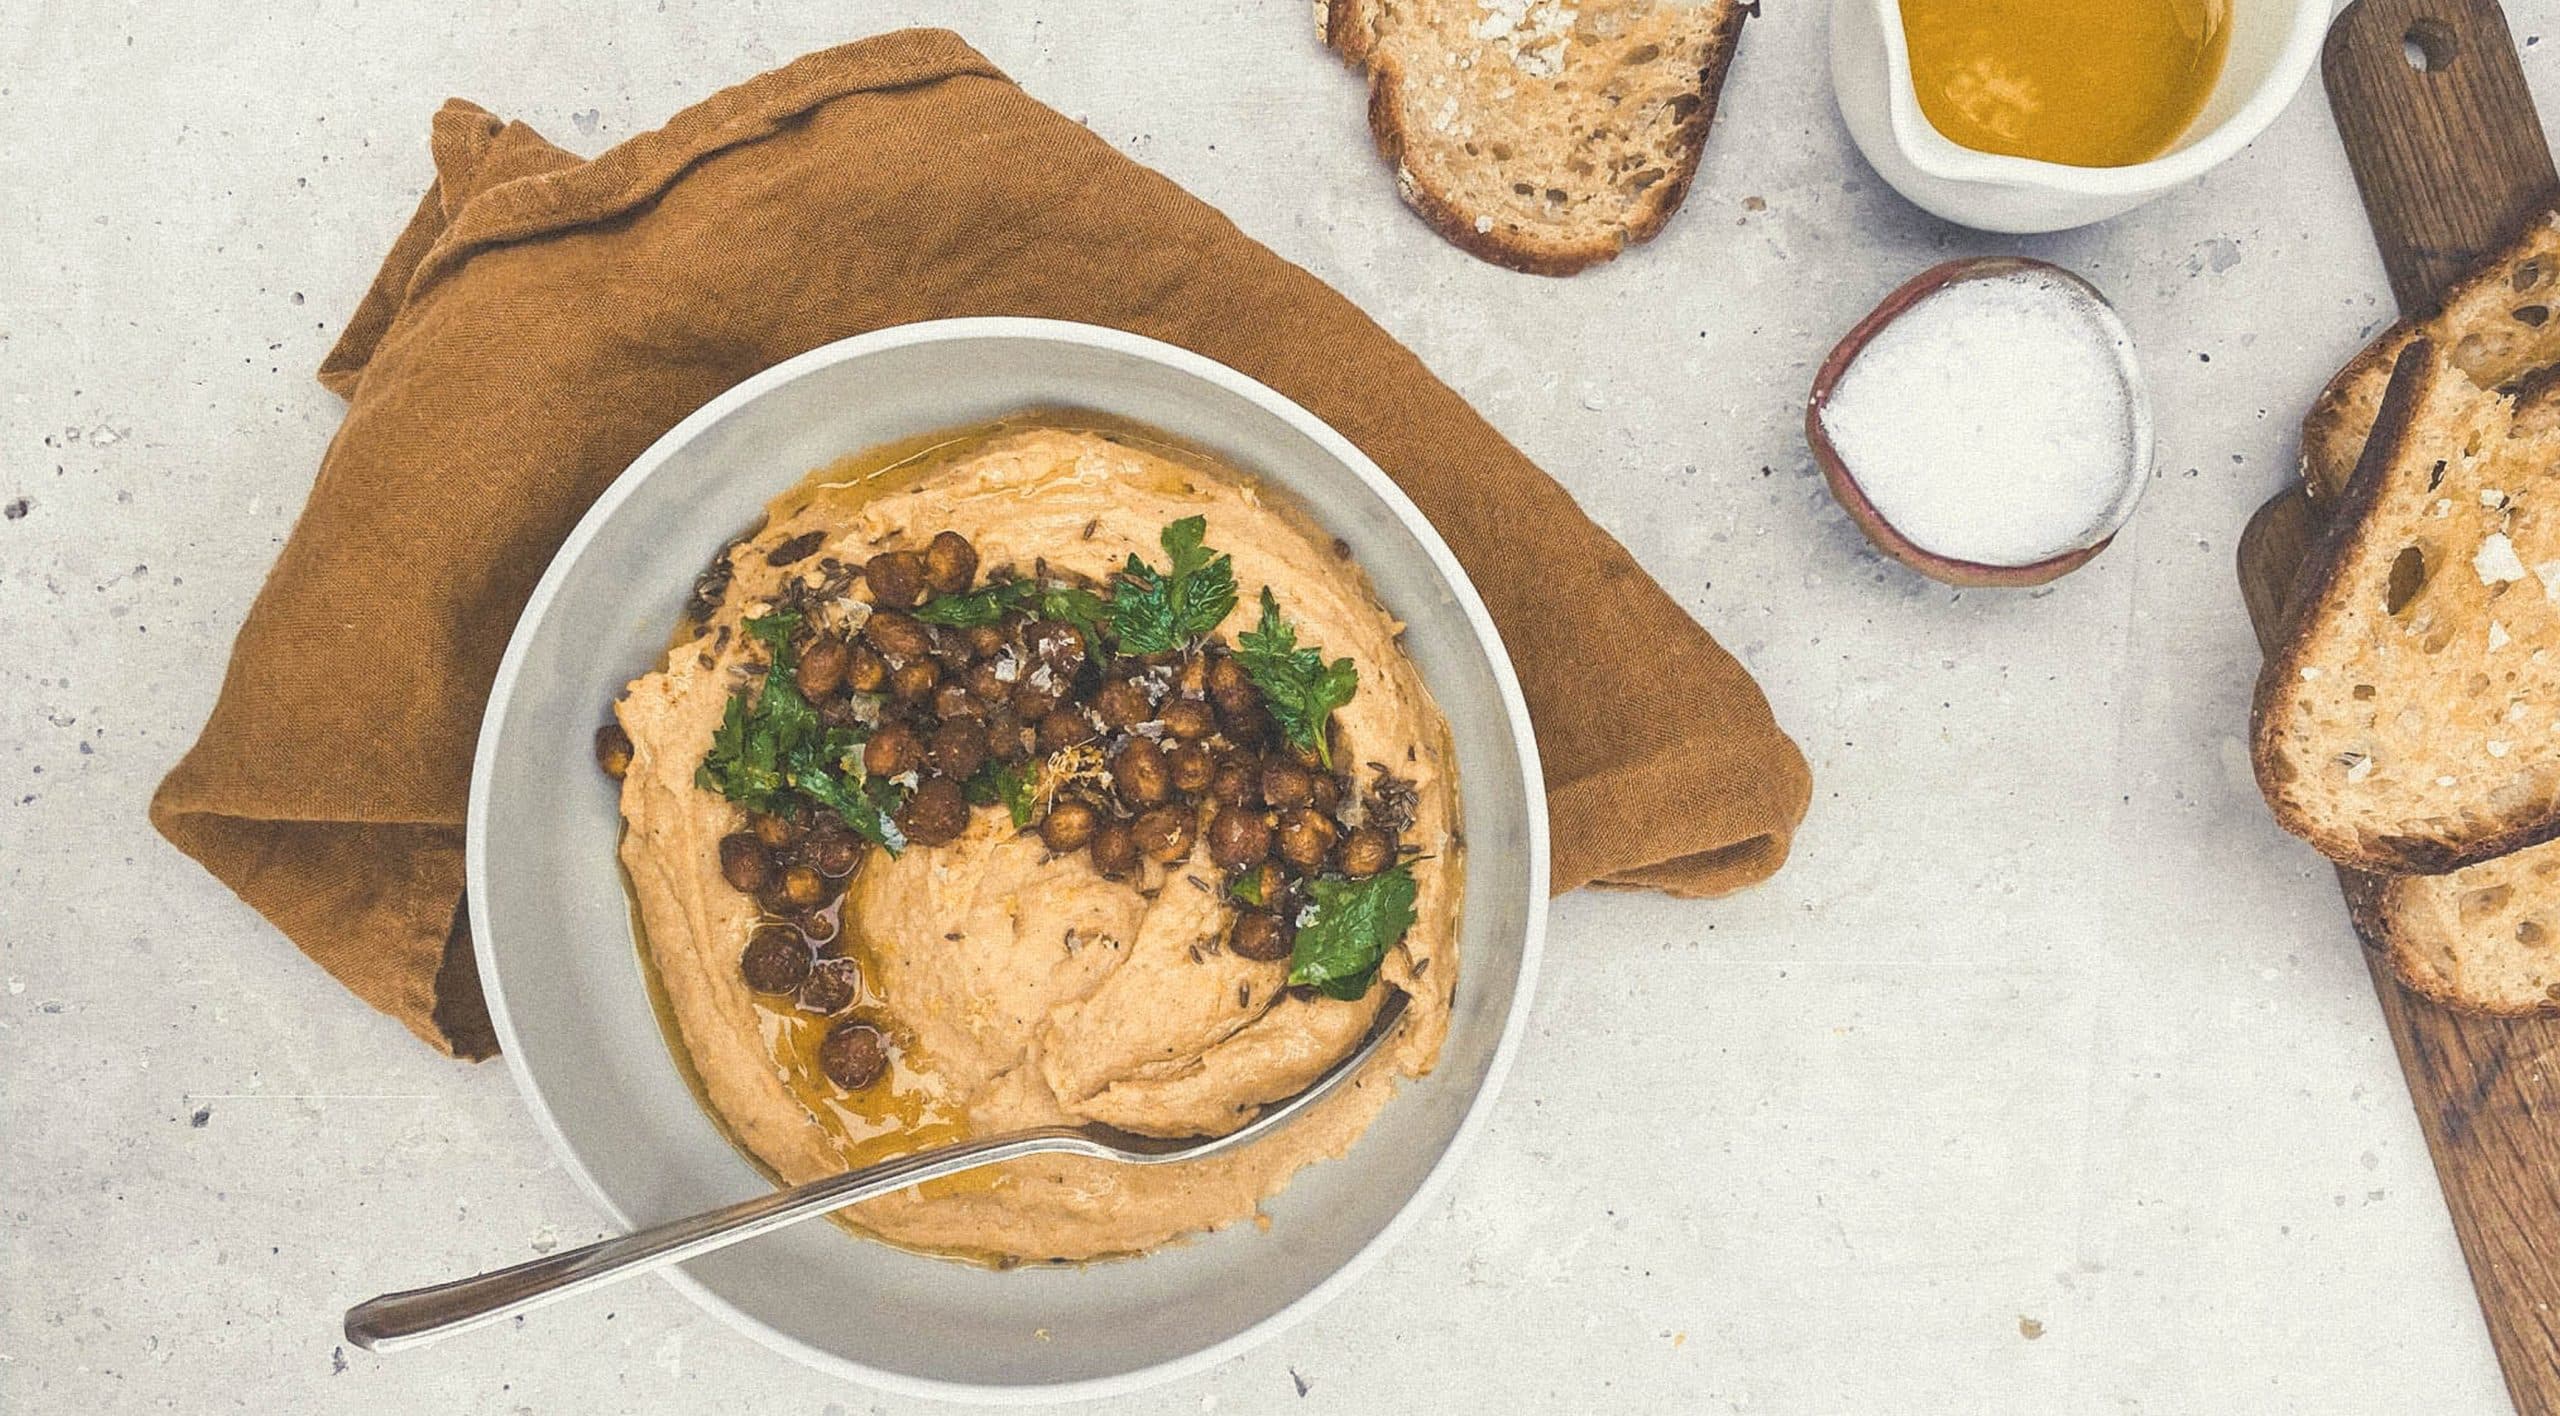 styleware-style-files-from-our-kitchen-hummus-bowl